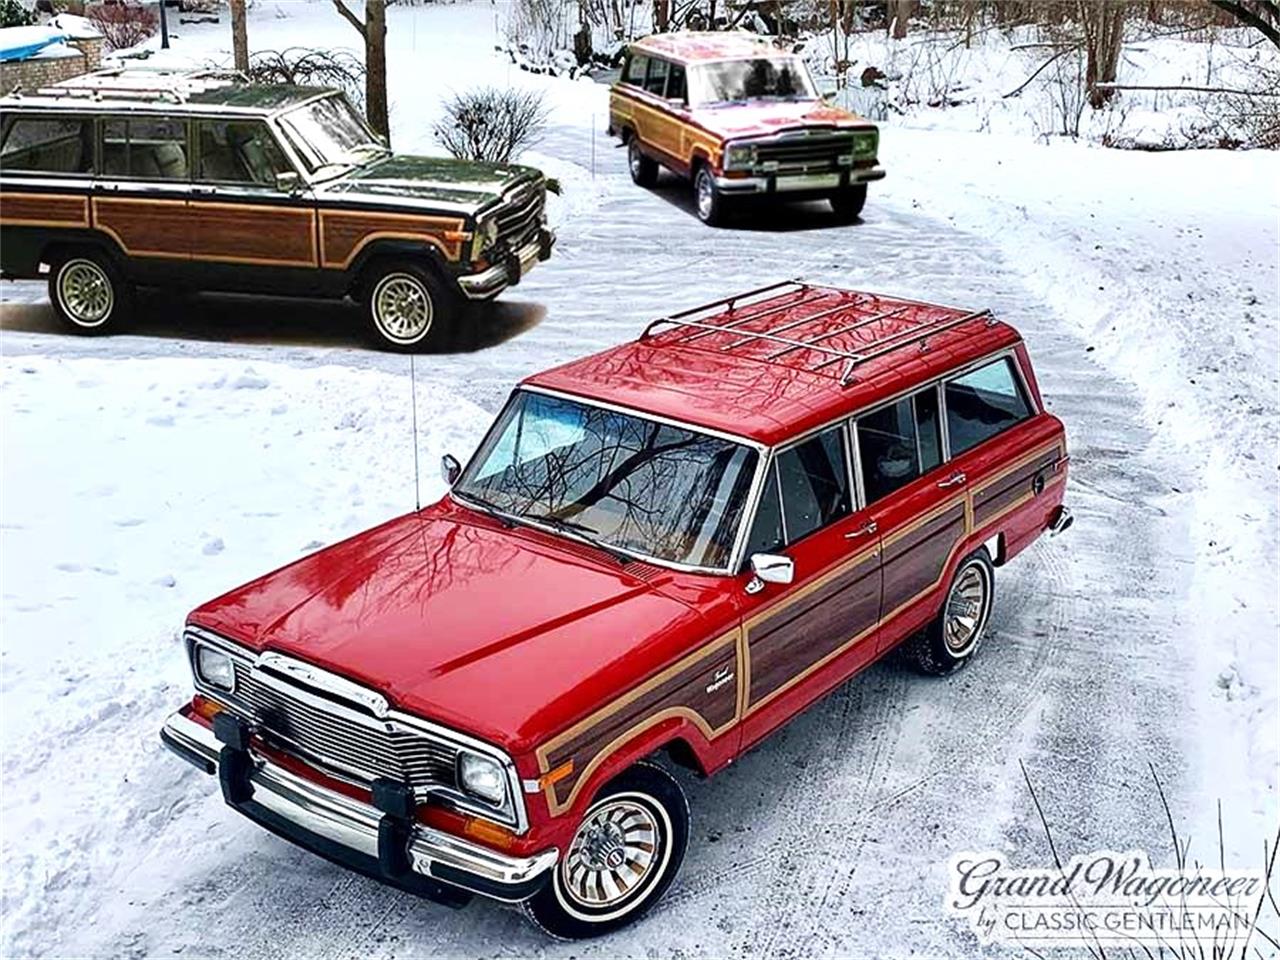 For Sale: 1985 Jeep Grand Wagoneer in Bemus Point, New York for sale in Bemus Point, NY